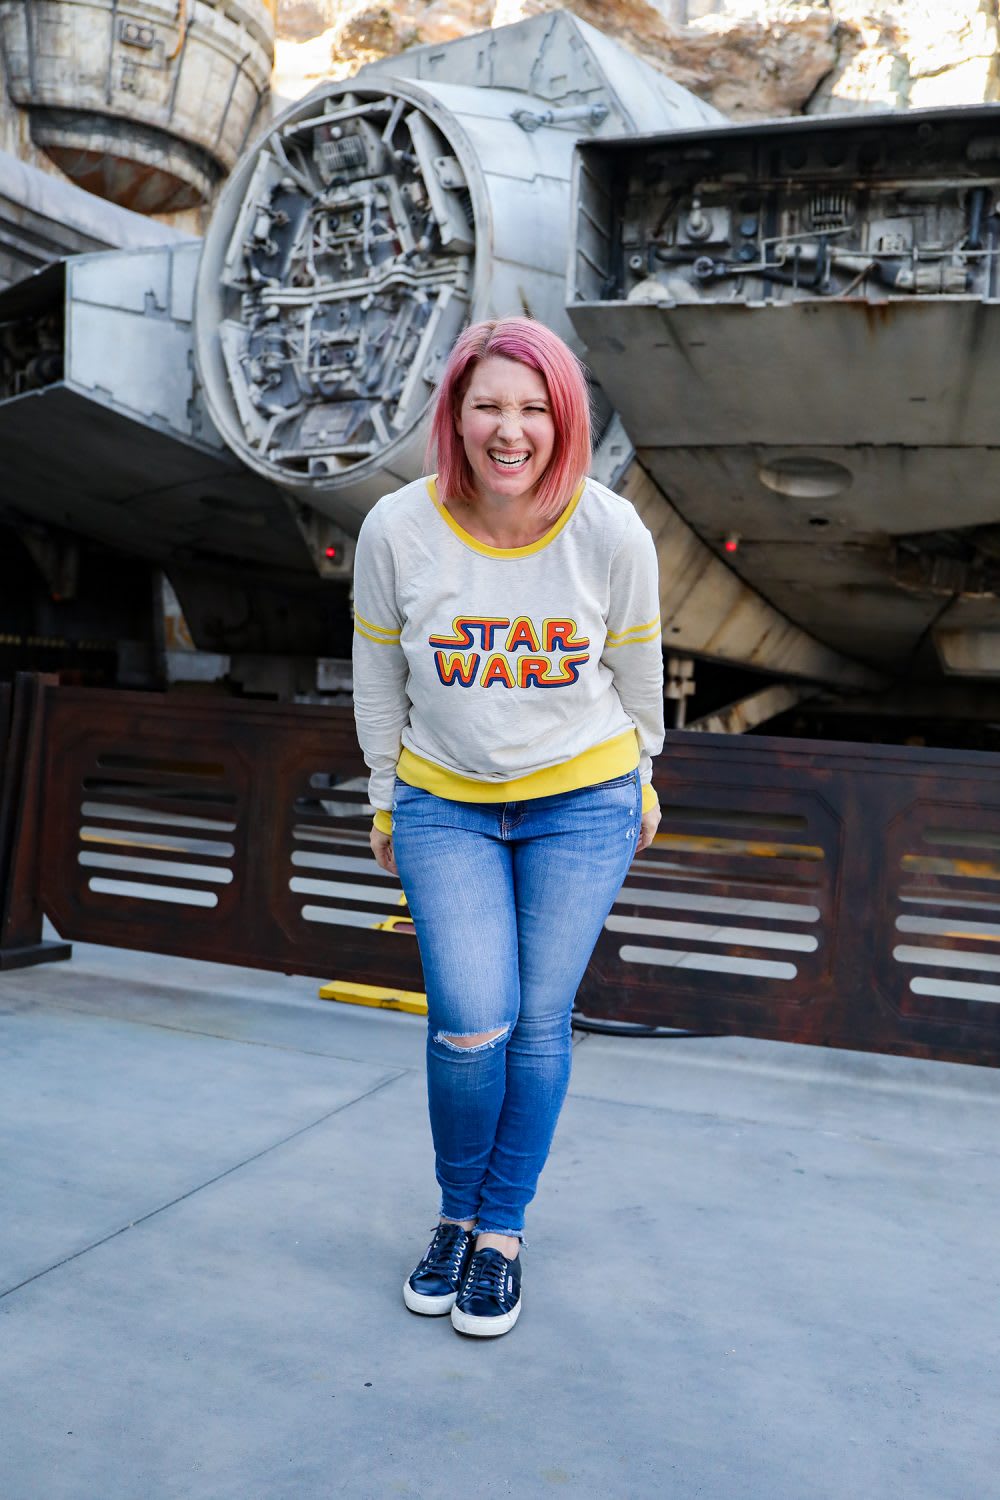 Star Wars Land Disneyland: Ultimate Guide to Galaxy's Edge - Lipgloss and Crayons